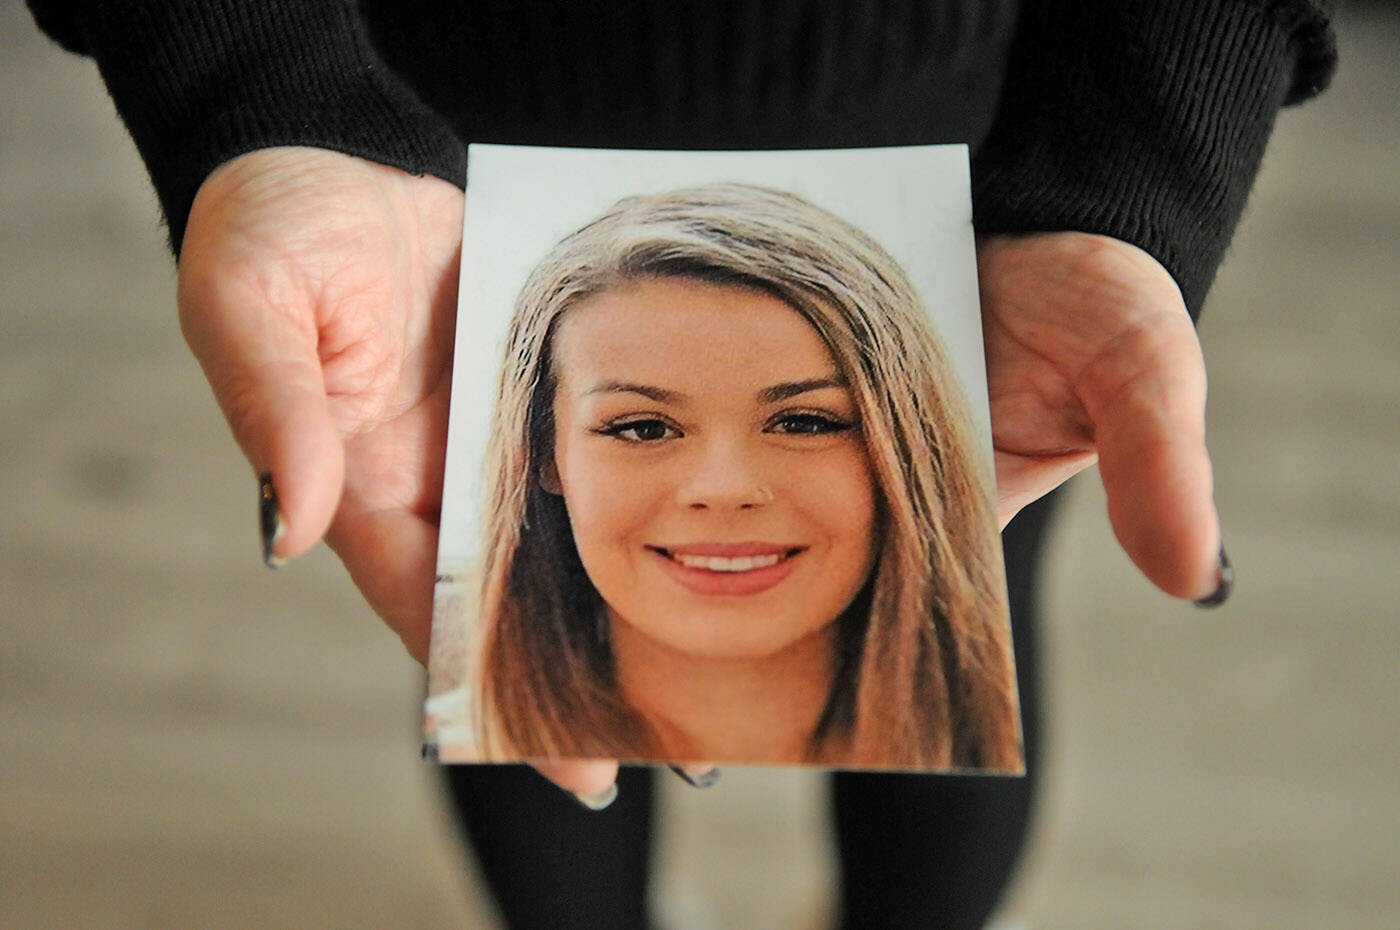 Alina Durham holds a photo of her daughter Shaelene Bell in her home on Jan. 12, 2023. Bell went missing on Jan. 30, 2021 and her body was found on June 2, 2021 in the Fraser River near Coquitlam. Durham has been trying for 18 months to get Shaelene’s Missing Adult Alert in place, but nothing has happened. (Jenna Hauck/ Chilliwack Progress)